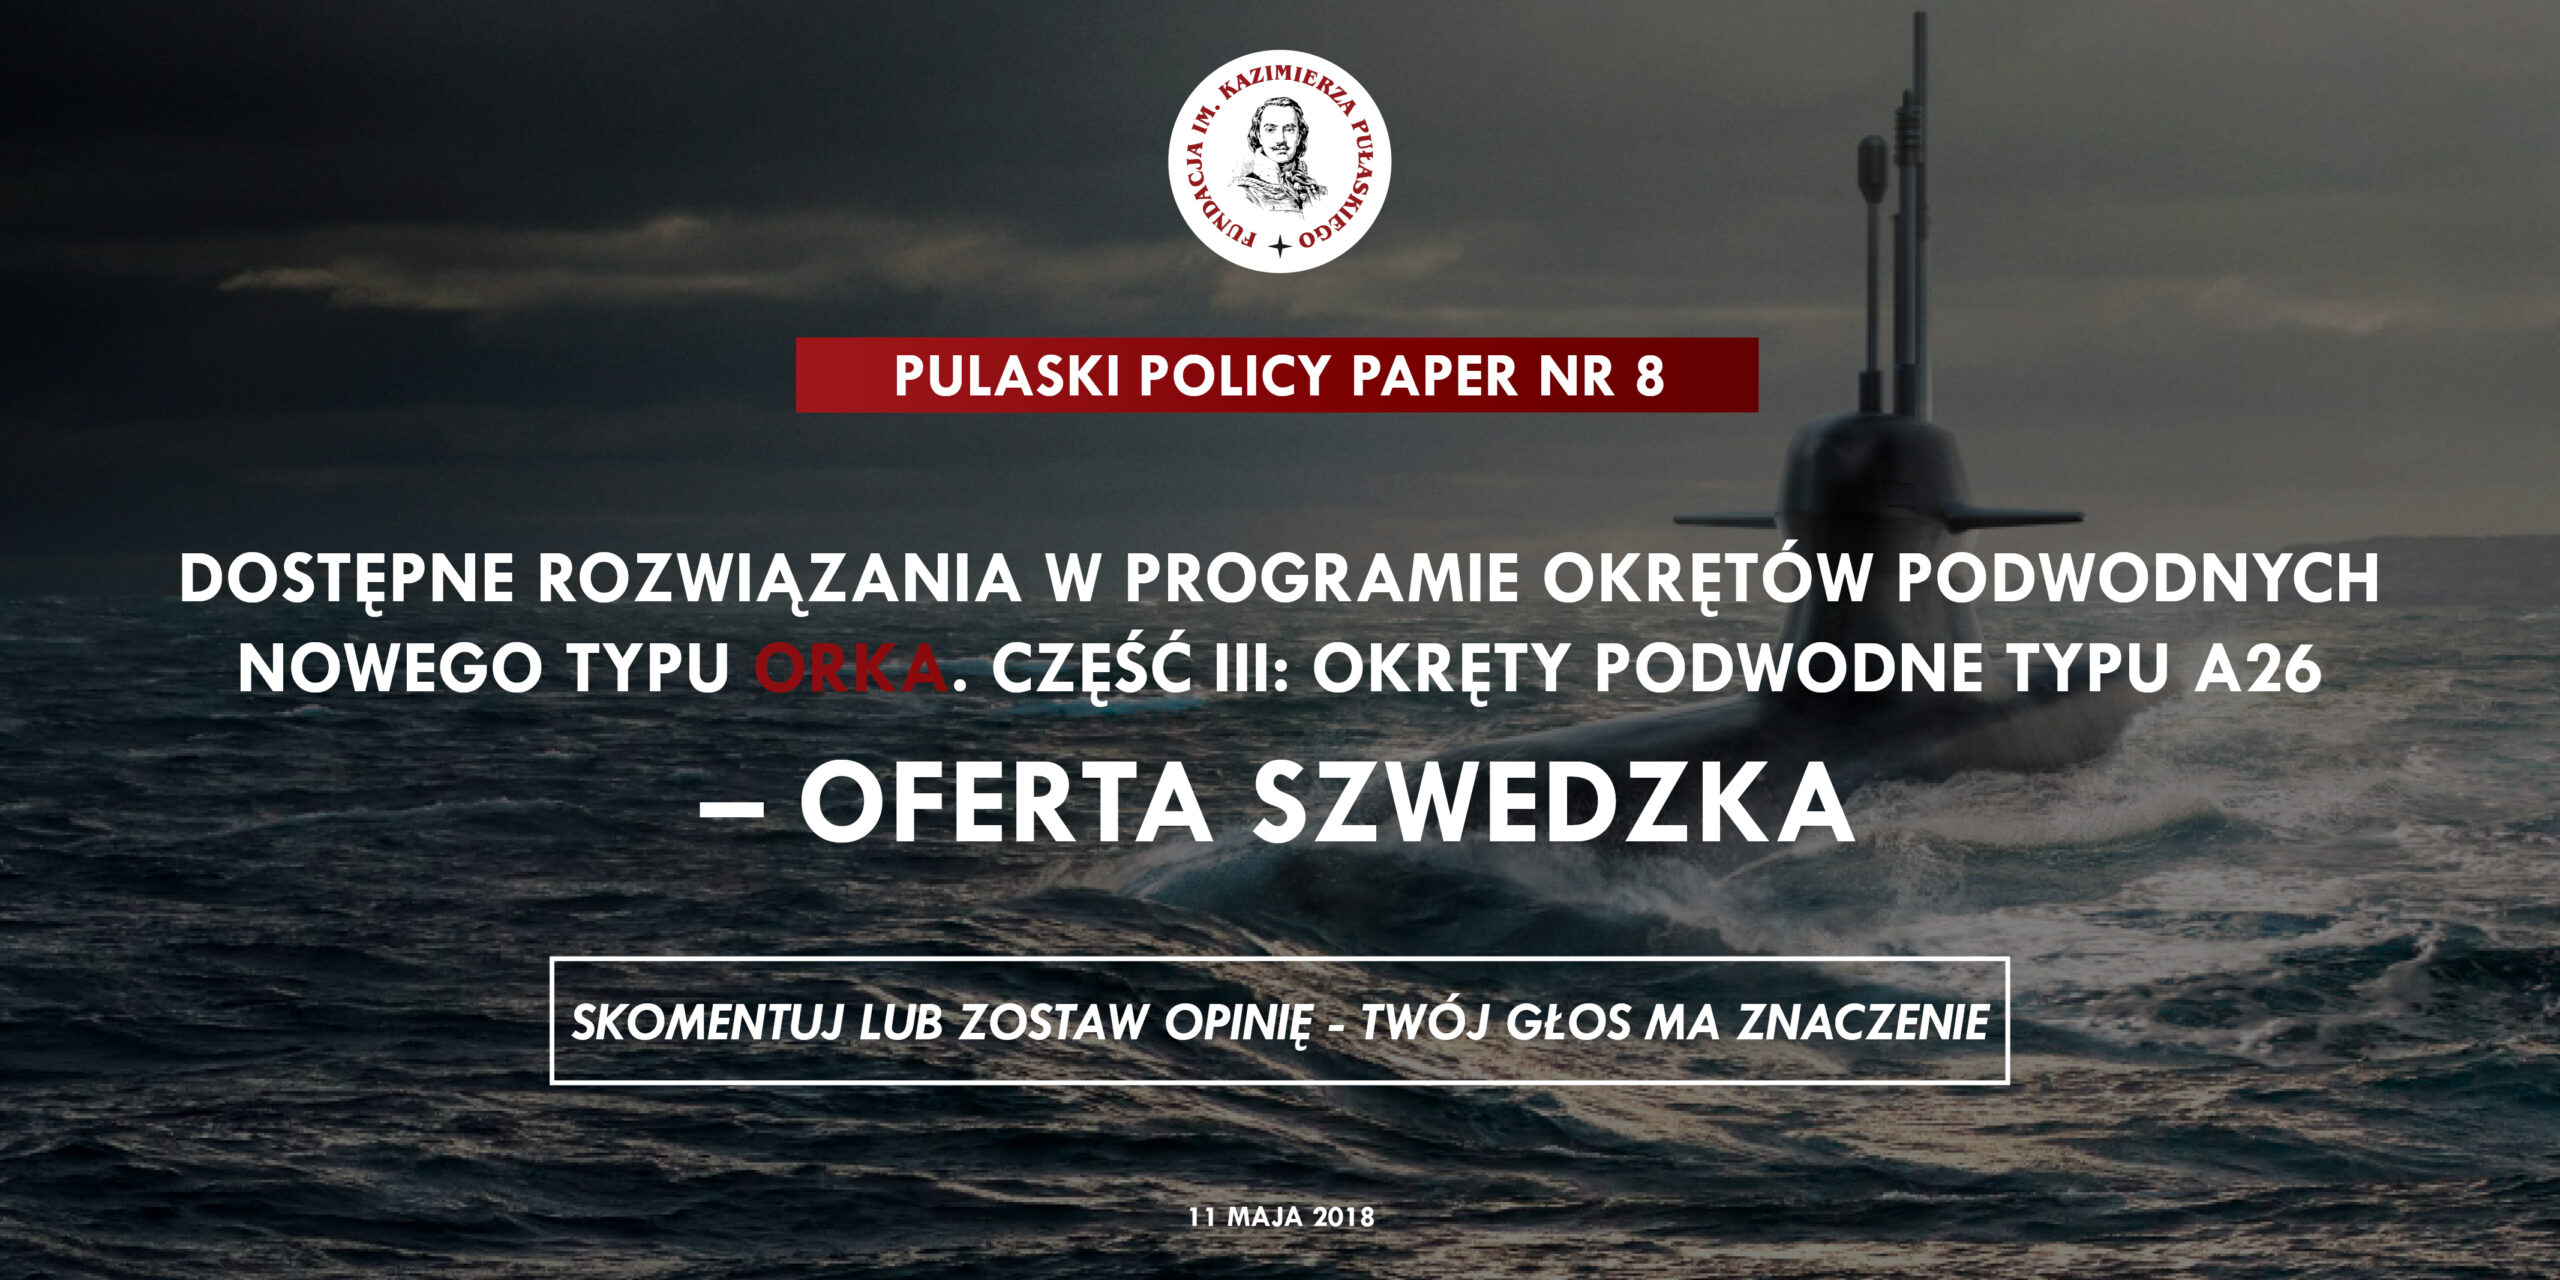 Poland’s ‘Orka’ submarine programme. Part 3. The A26 submarines – Swedish Offer